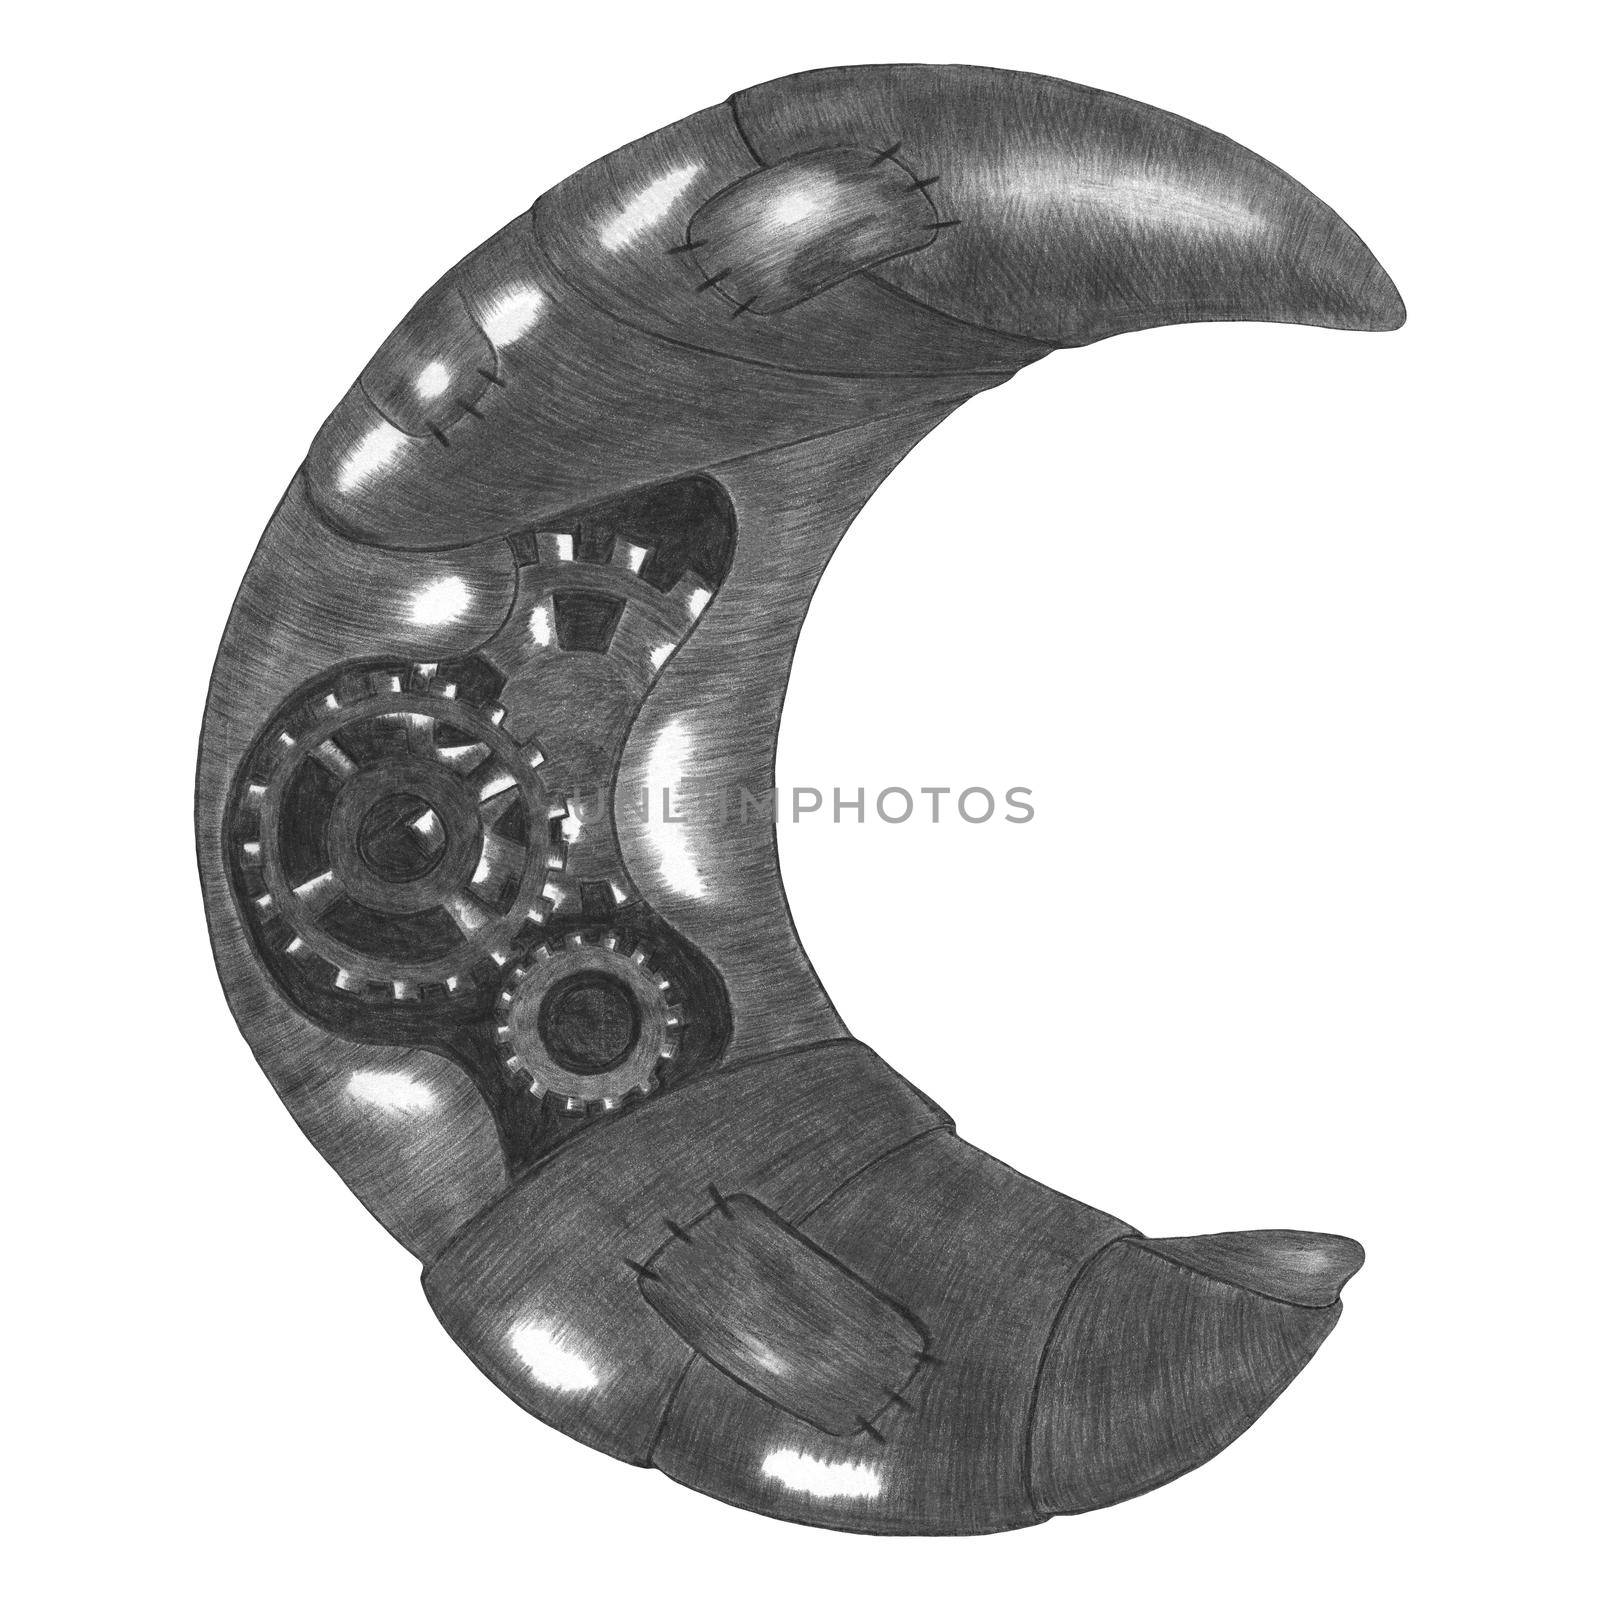 Hand Drawn Illustration of Black and White Steampunk Moon in Gray Colors on White Background. Steampunk Moon Design Element Drawn by Pencil.